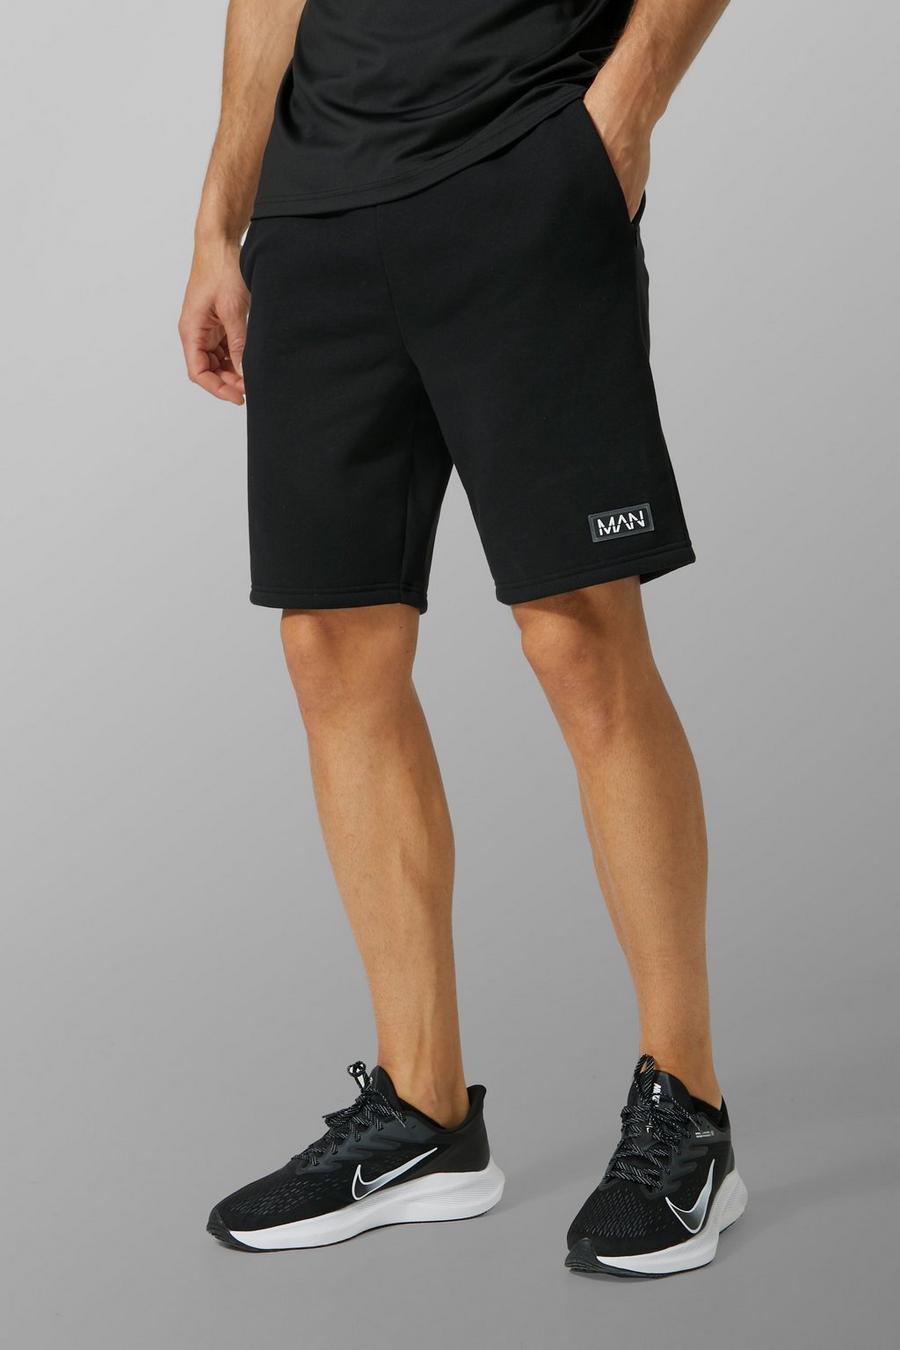 Tall Man Active Trainings-Shorts, Black image number 1